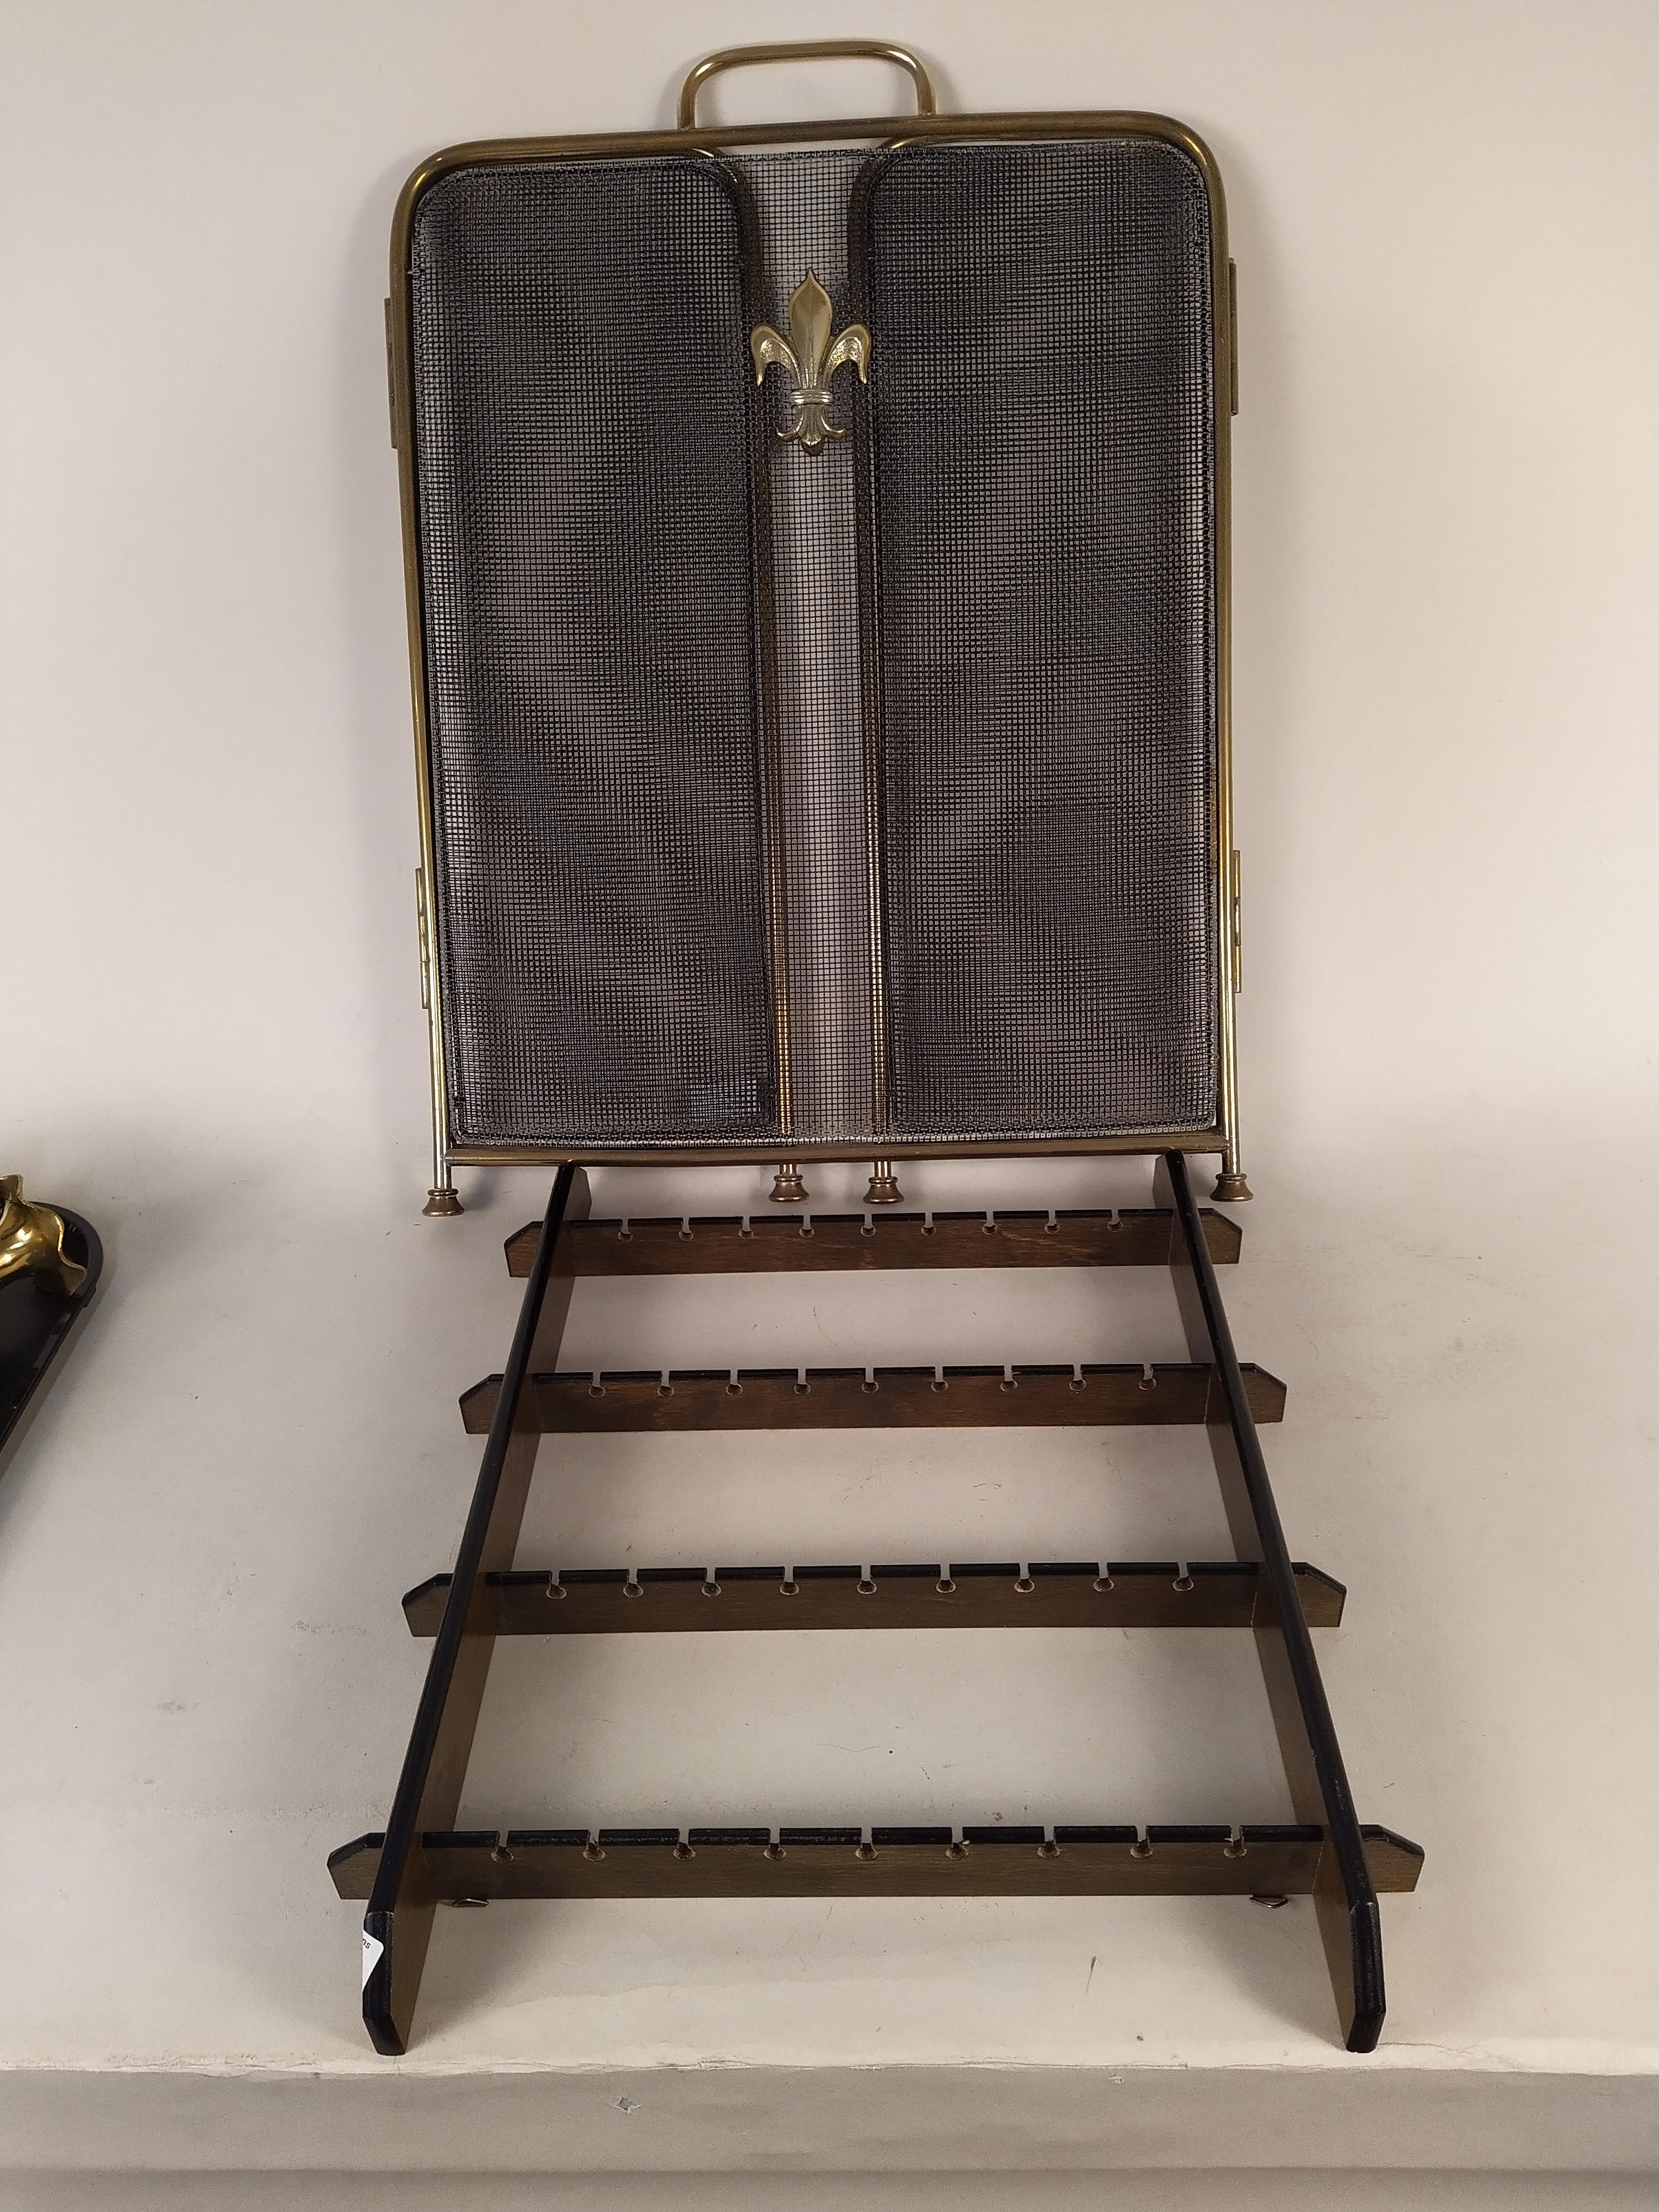 A folding brass fire screen, a spoon collectors rack, - Image 3 of 3